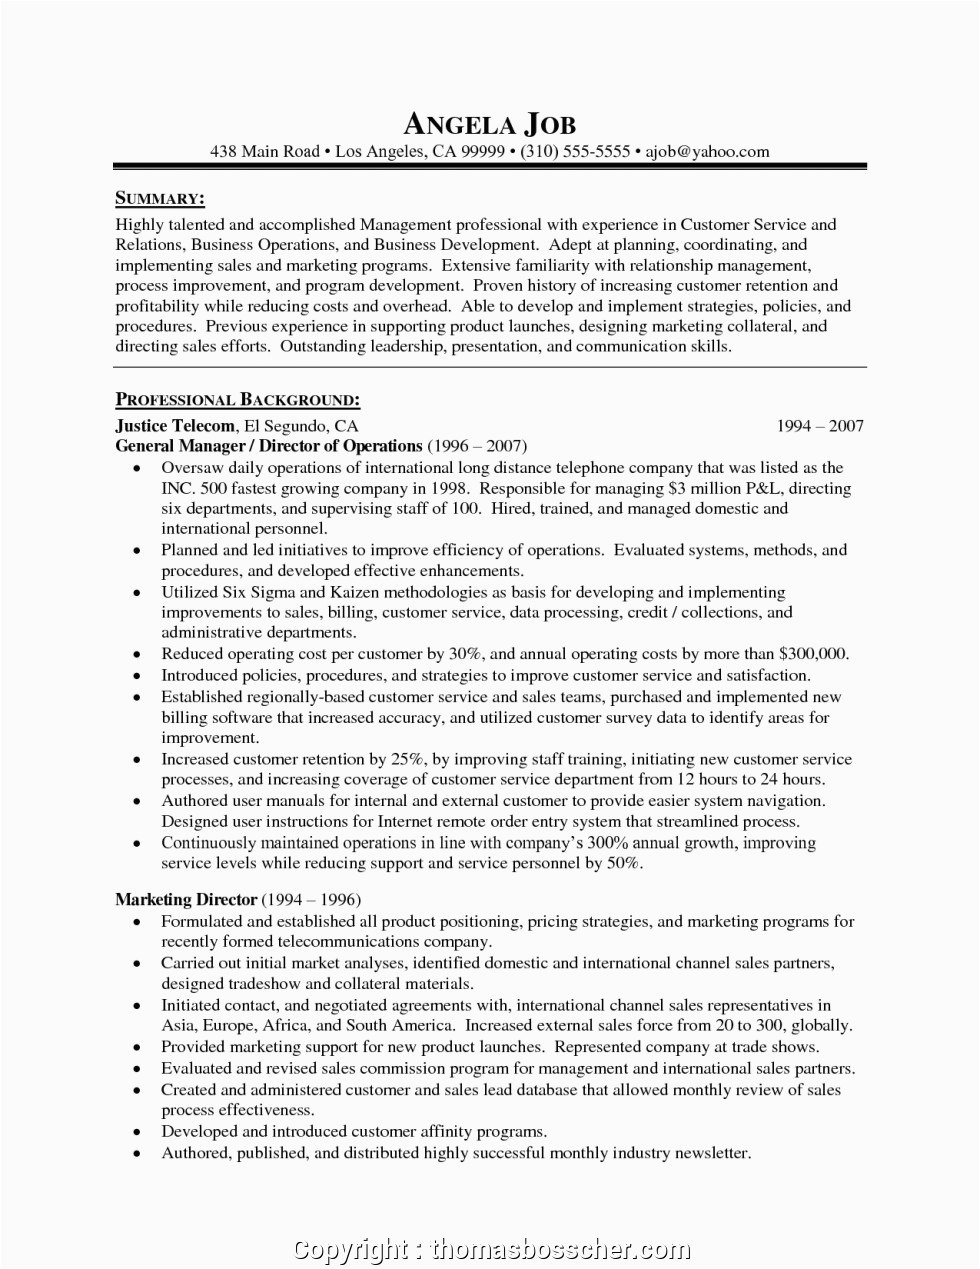 Customer Service Manager Resume Objective Sample Newest Objective for Customer Service Manager Resume